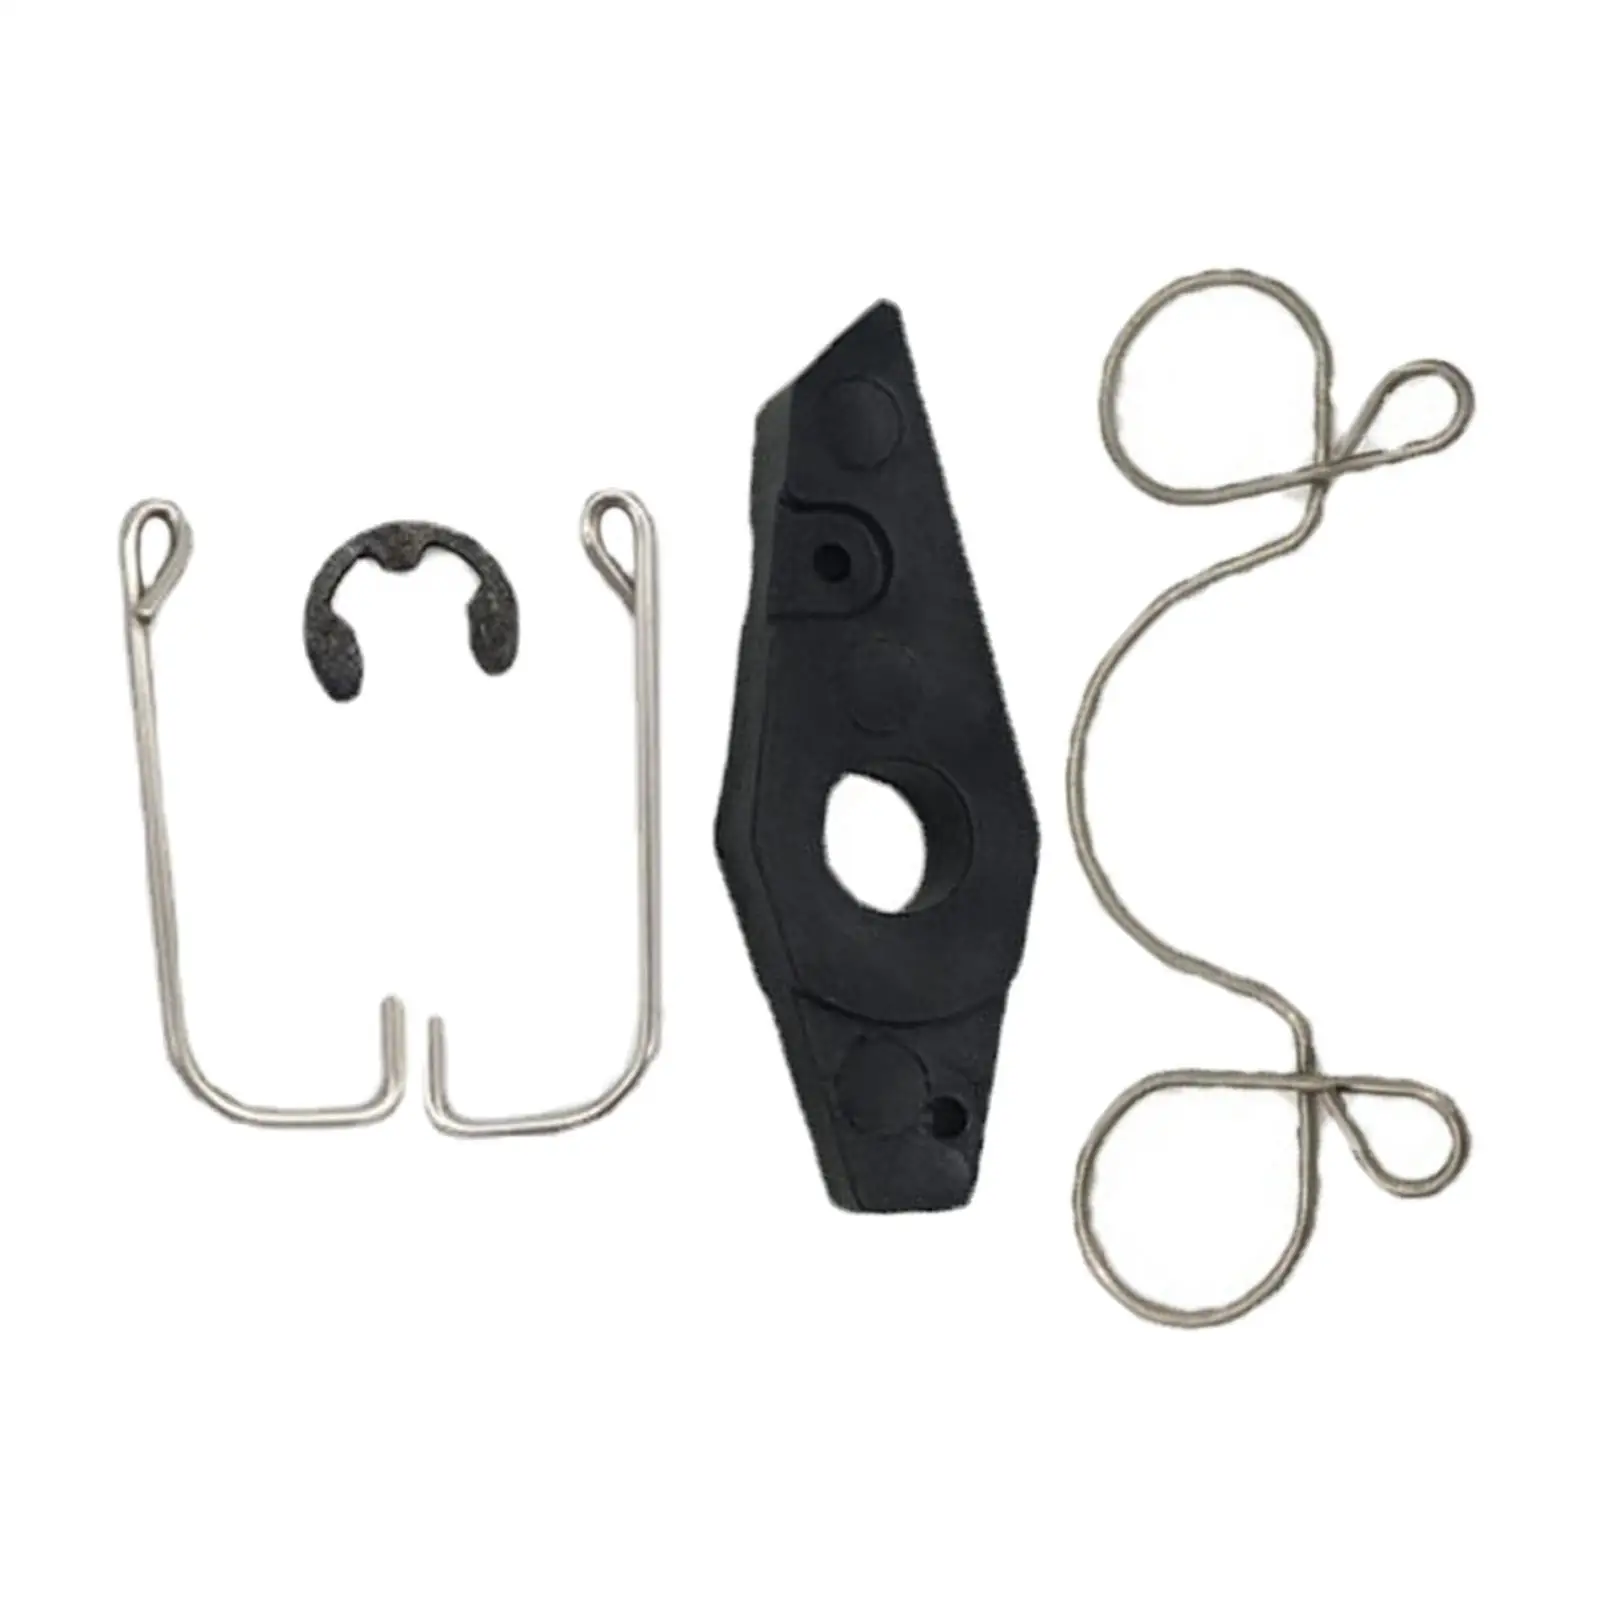 Pull Start Repair Tools Accessory Replaces for Yamaha Outboard 2-Storke